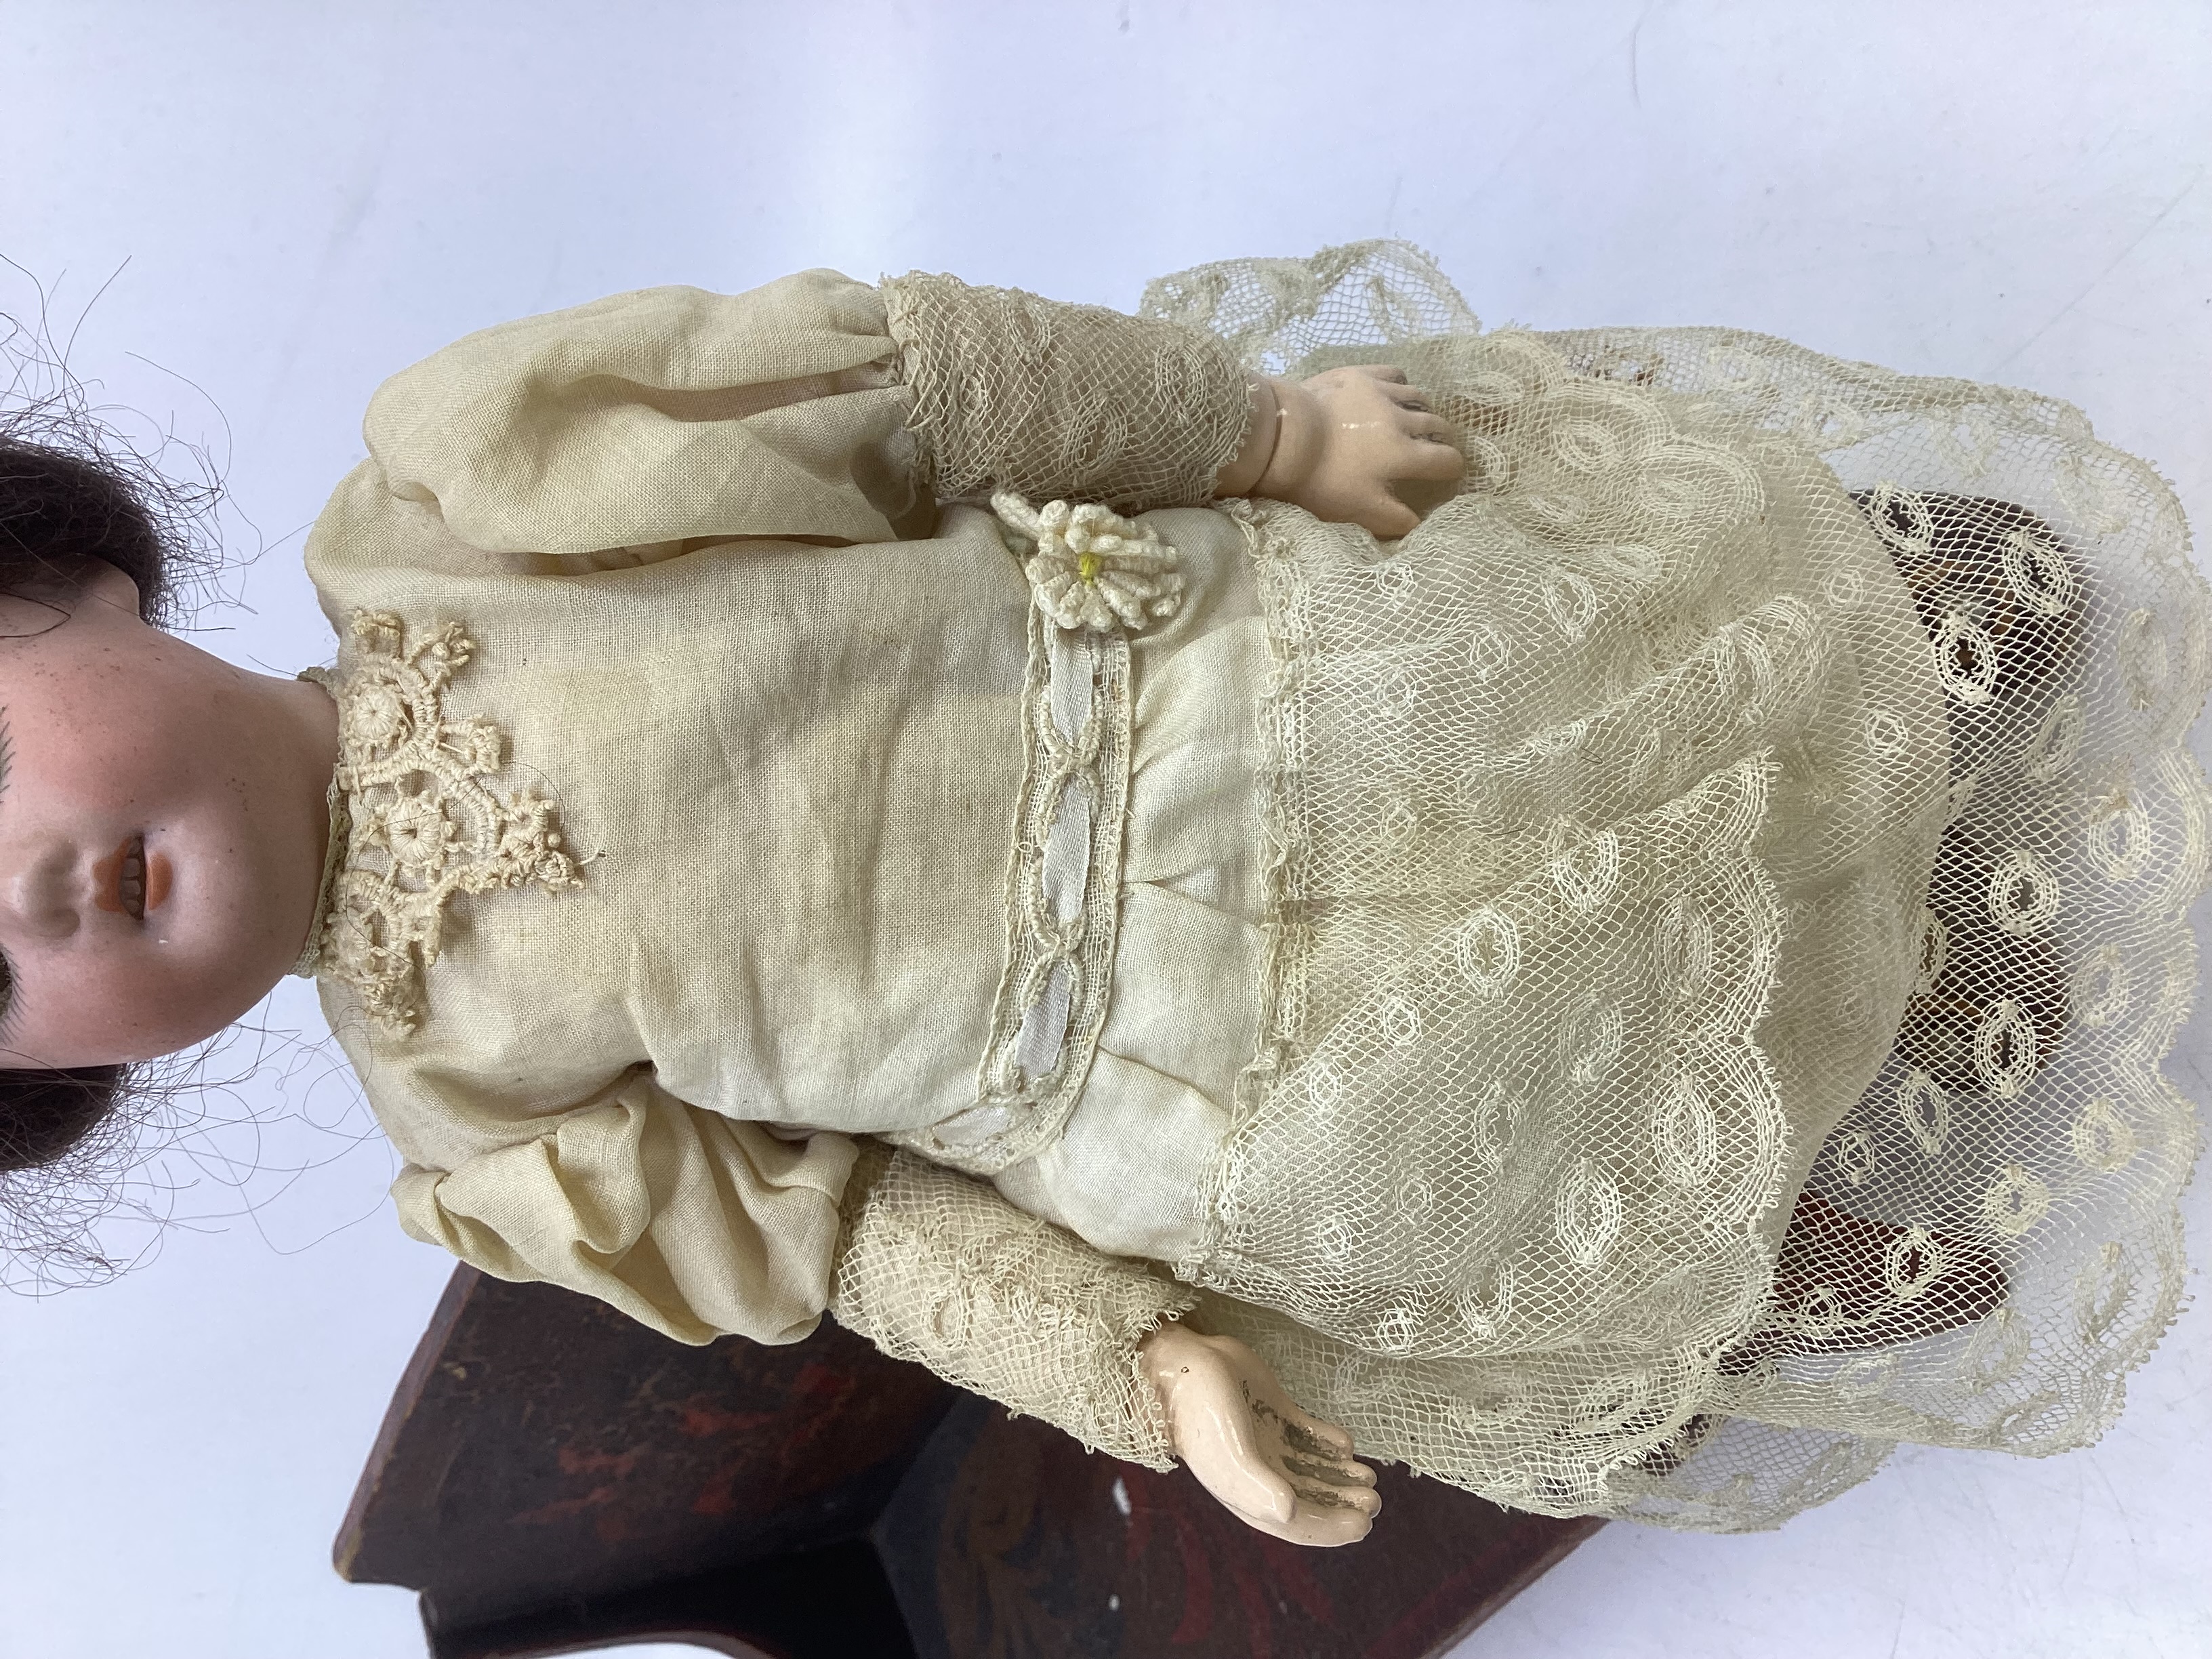 Antique German miniature 9” bisque head fully articulated doll with fixed glass eyes in antique - Image 3 of 4